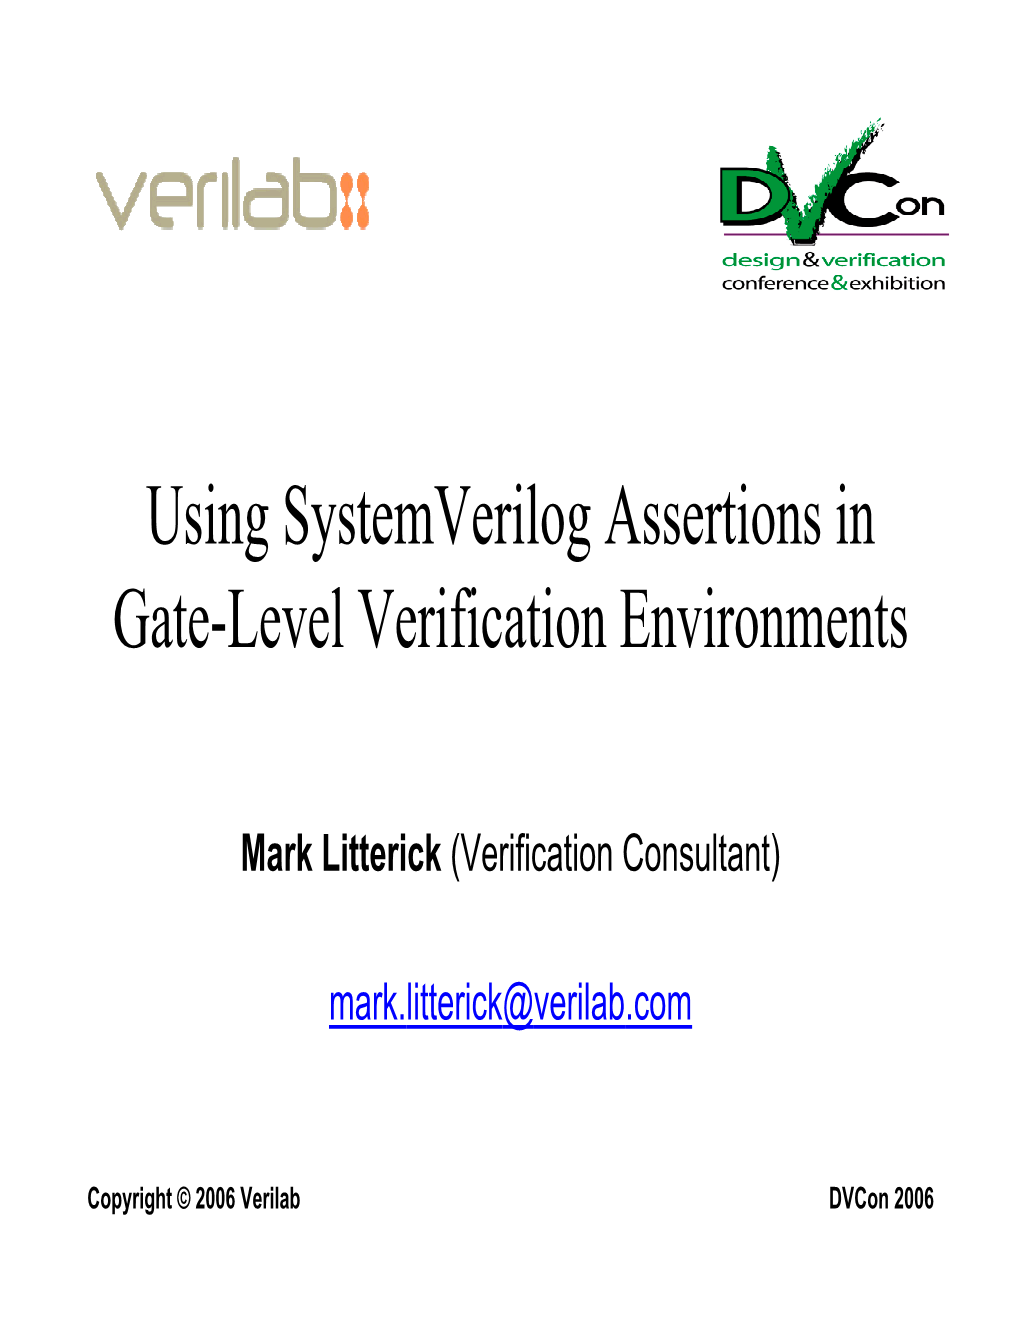 Using Systemverilog Assertions in Gate-Level Verification Environments